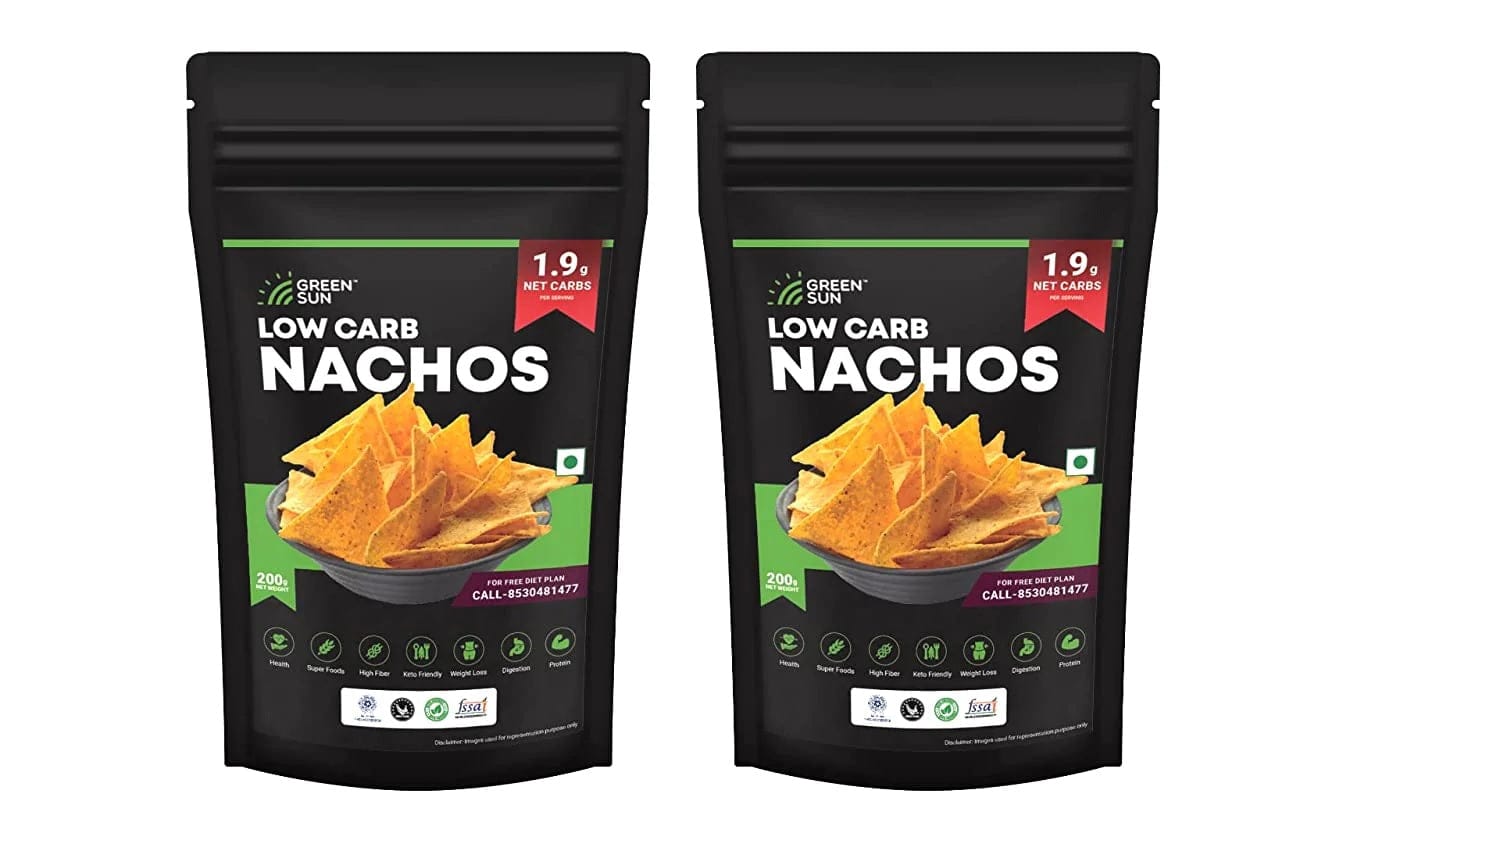 Green Sun Low Carb Nachos Chips 200 Grams Healthy Mexican Tortilla Peri Peri Keto Friendly Tasty Savoury Snack Low Calorie Sugar Free High Protein Low GI Super Foods High Fiber pack of 2